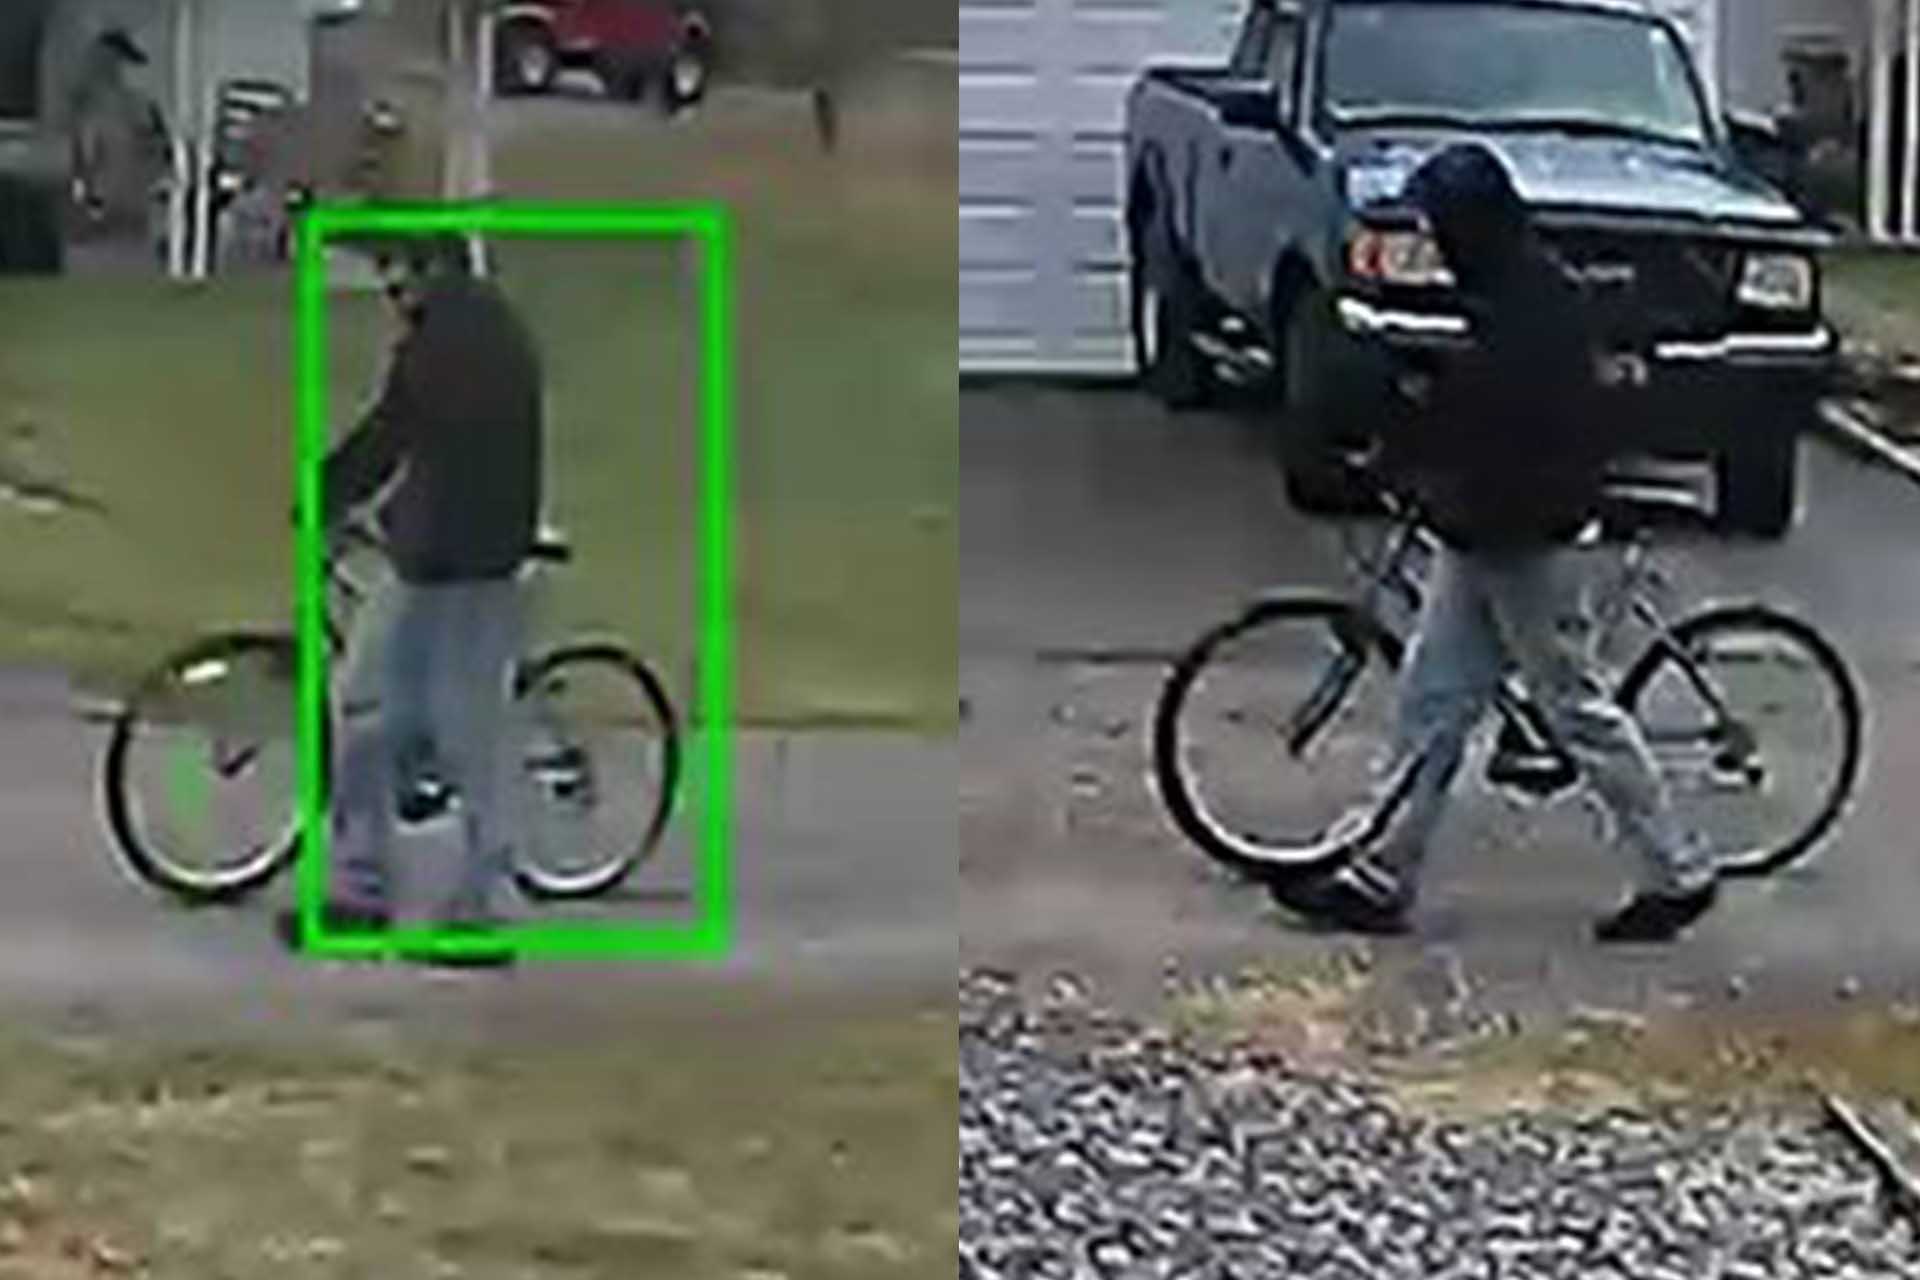 If you can identify this person of interest, please contact the Buckhannon Police Department at 304-472-5723.